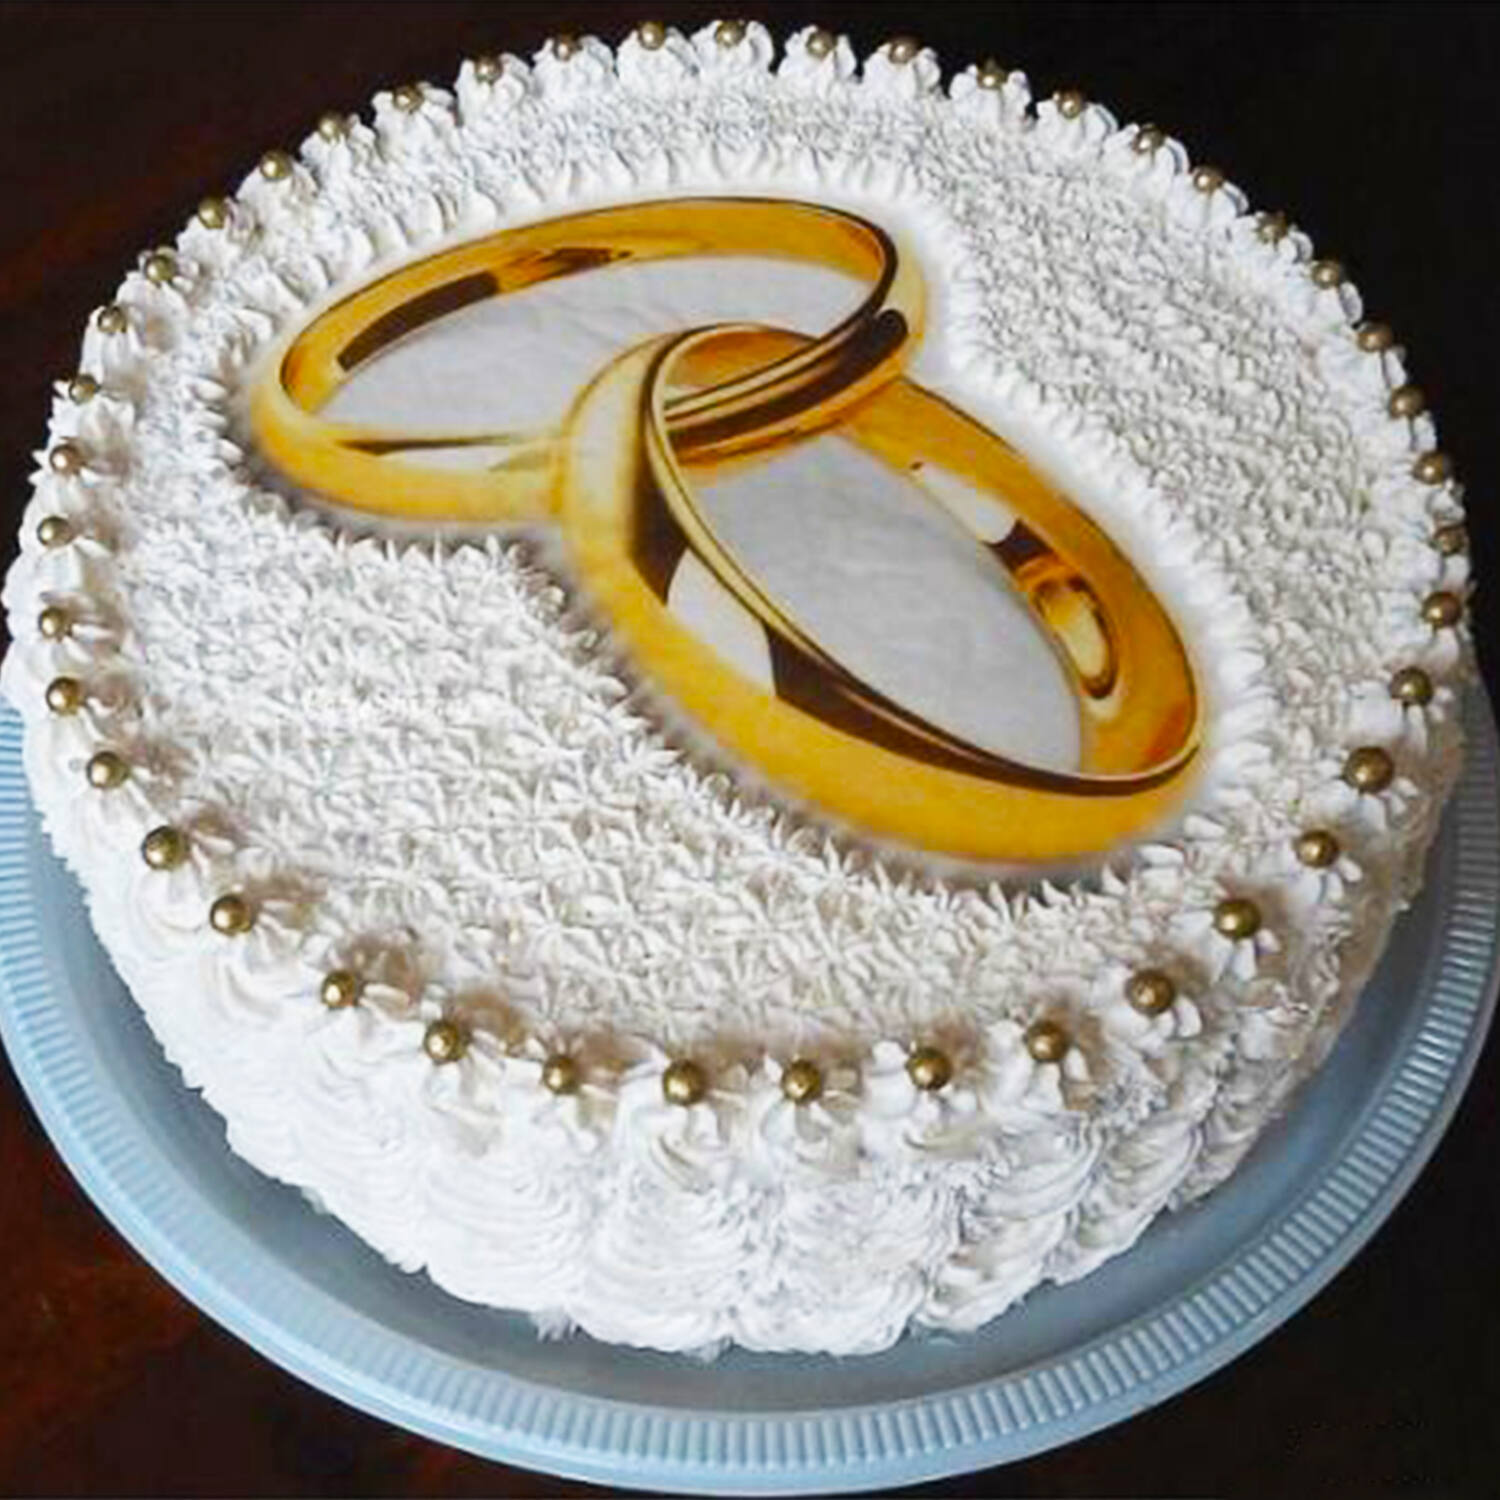 Manmouji sweets - Special for ring ceremony cake #ringceremony #cakelovers  | Facebook